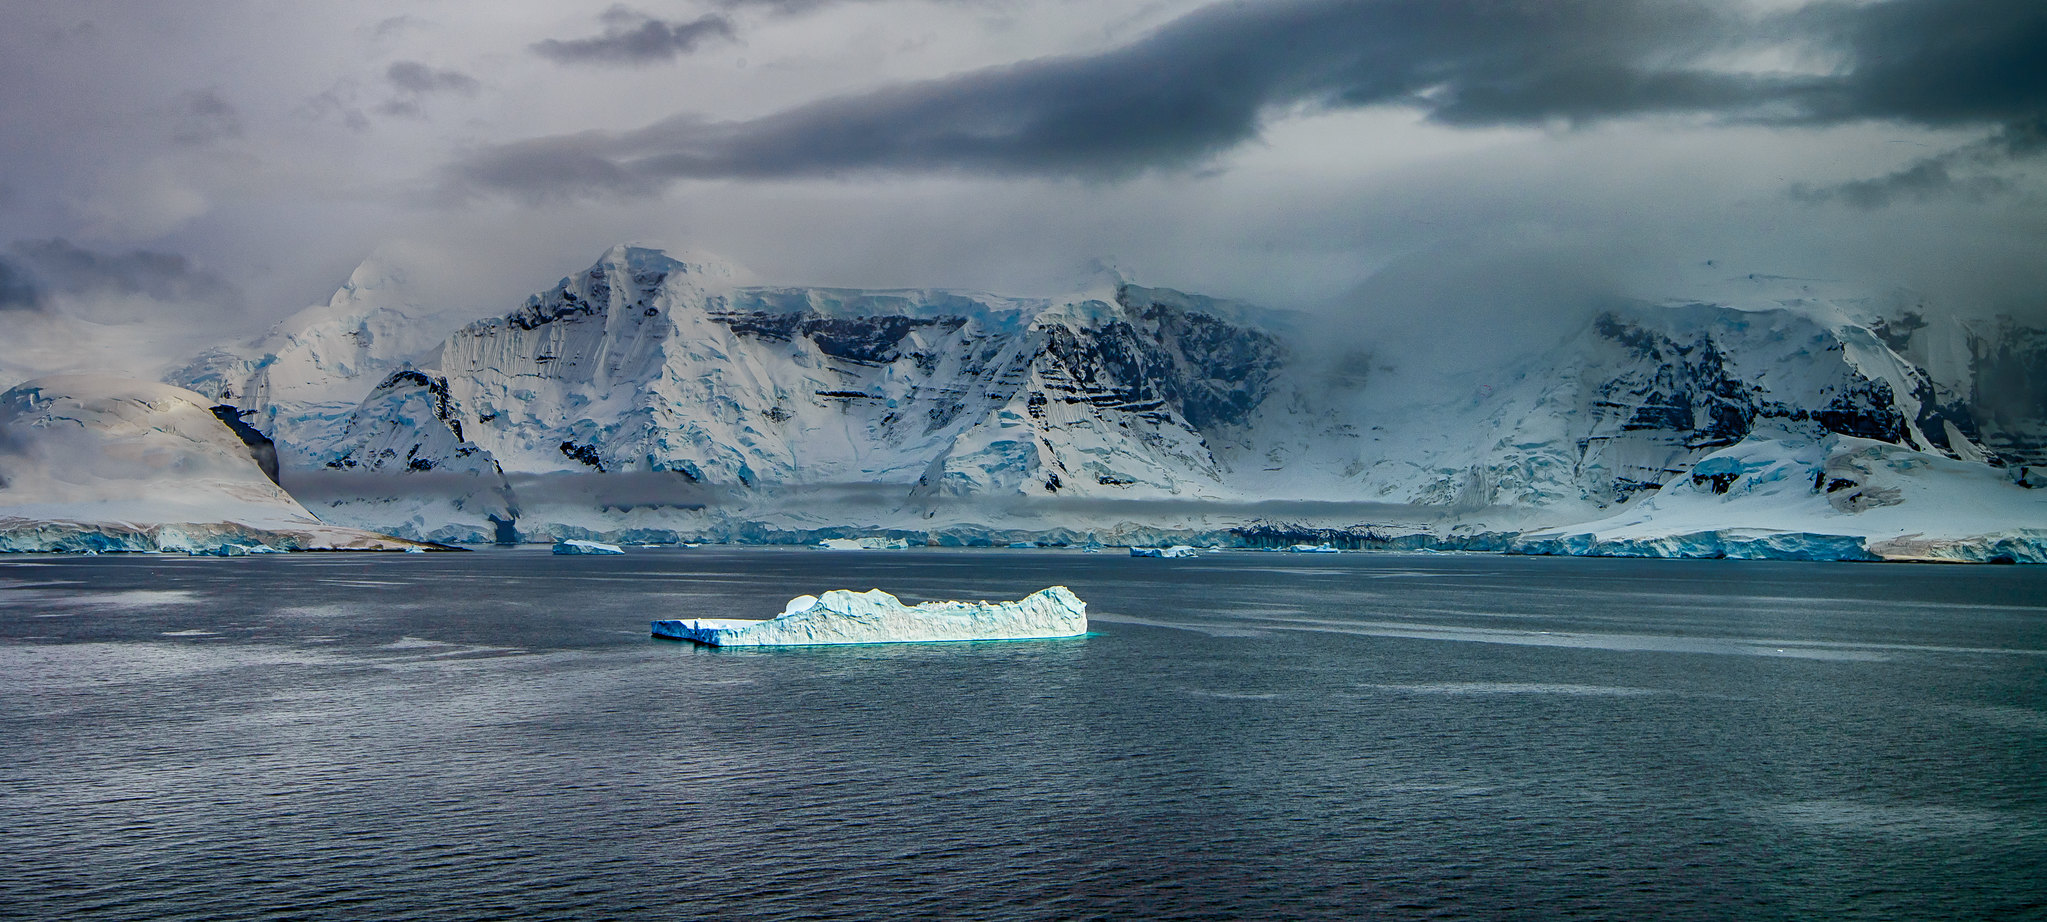 What We Do Now Will Define the Oceans and Cryosphere of the Future